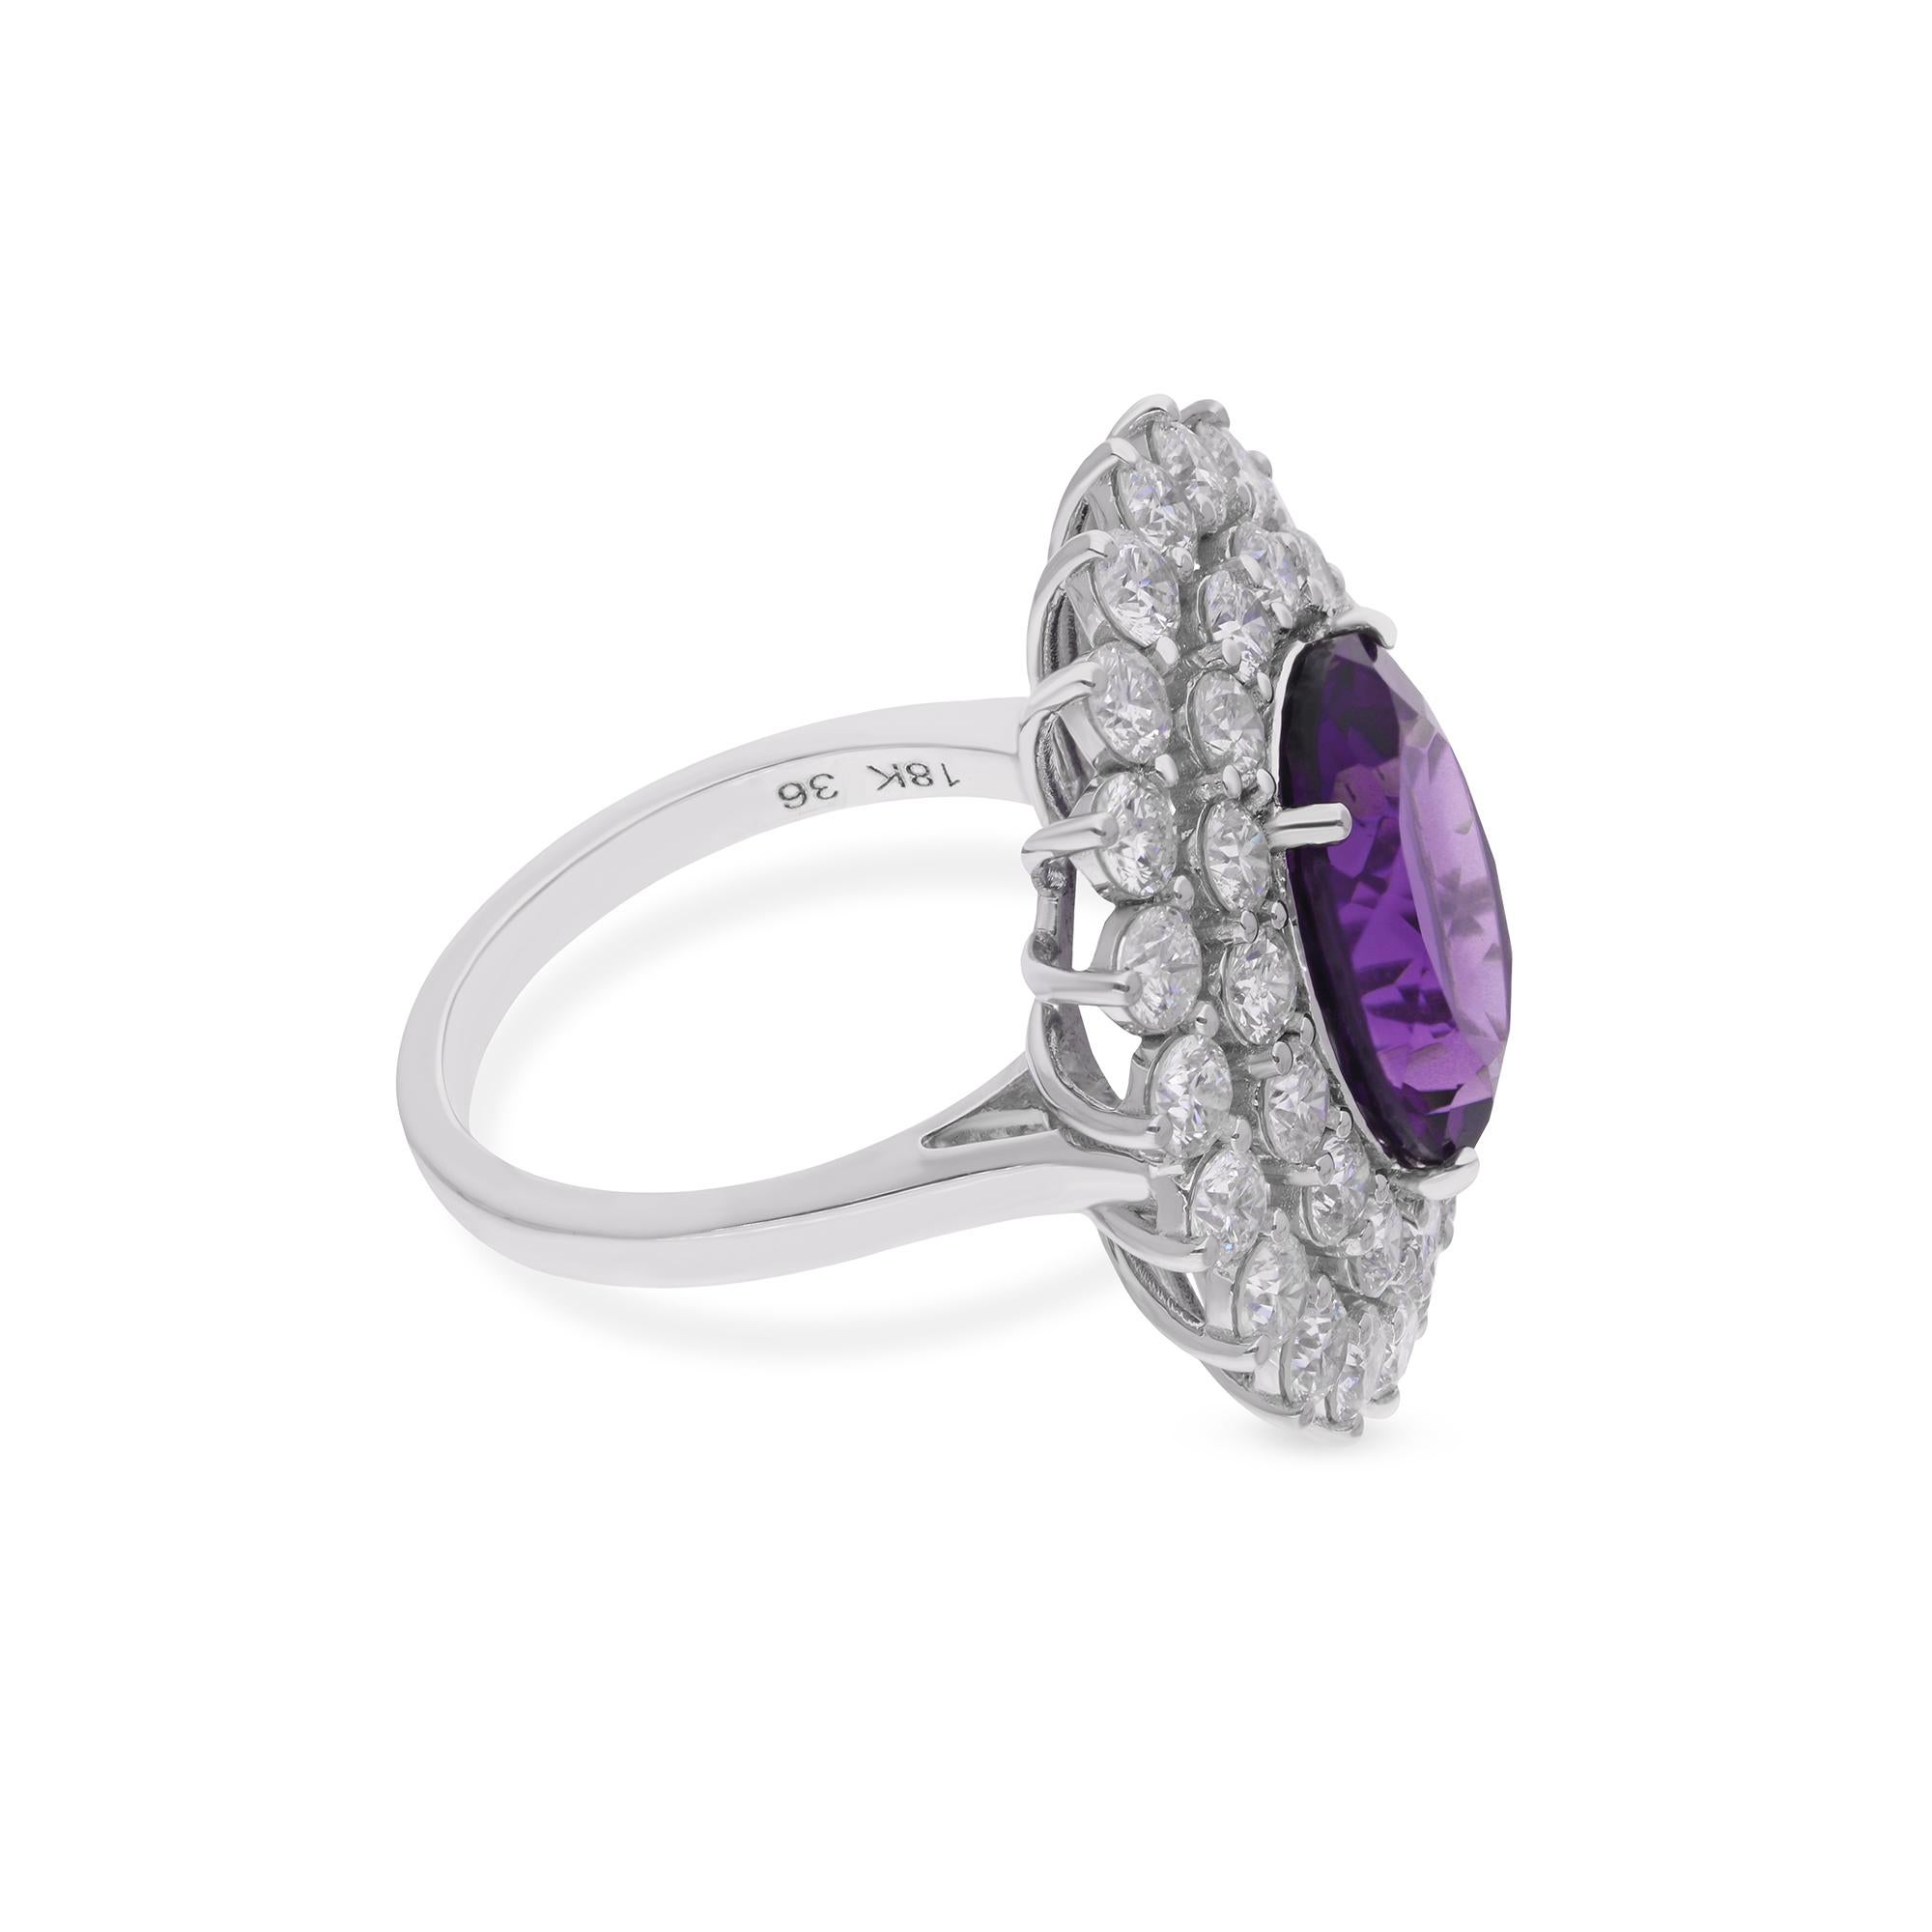 Item Code :- SER-24123D
Gross Wt. :- 9.14 gm
18k White Gold Wt. :- 7.27 gm
Natural Diamond Wt. :- 3.56 Ct. ( AVERAGE DIAMOND CLARITY SI1-SI2 & COLOR H-I )
Amethyst Wt. :- 5.80 Ct.
Ring Size :- 7 US & All size available

✦